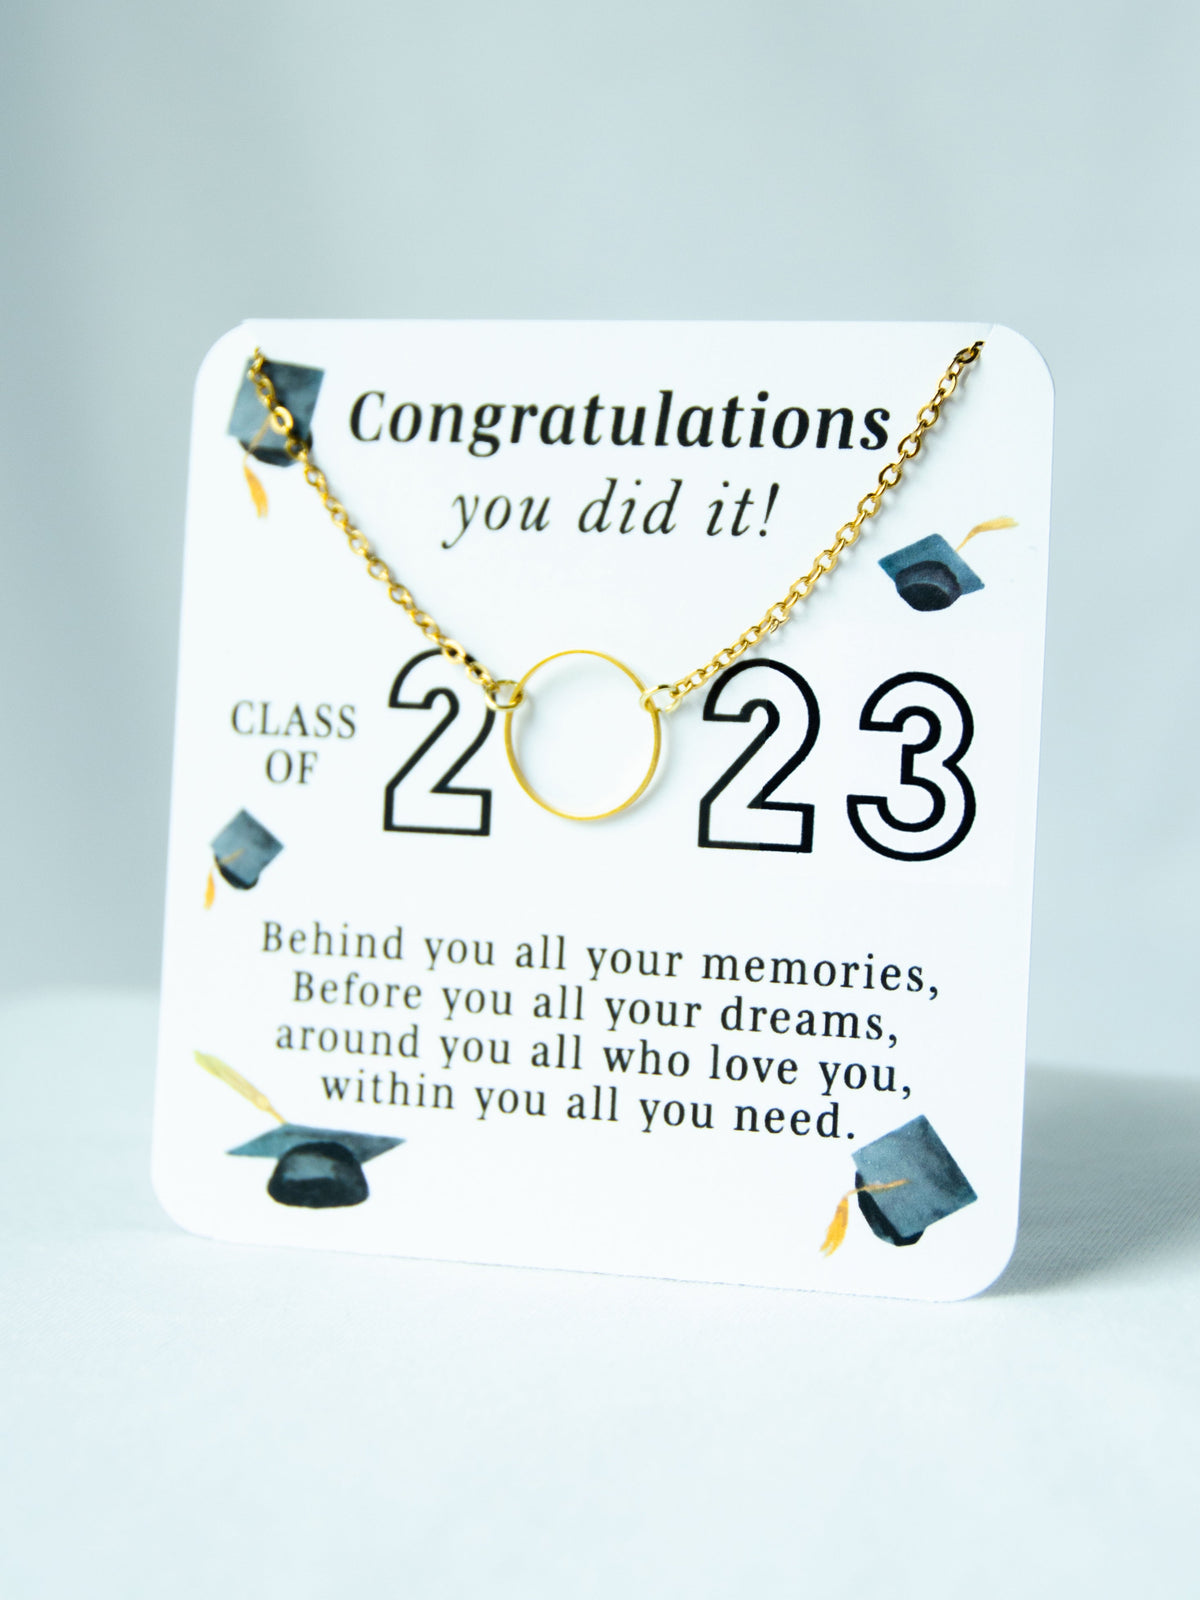 class of 2023 congratulations jewelry necklace gift